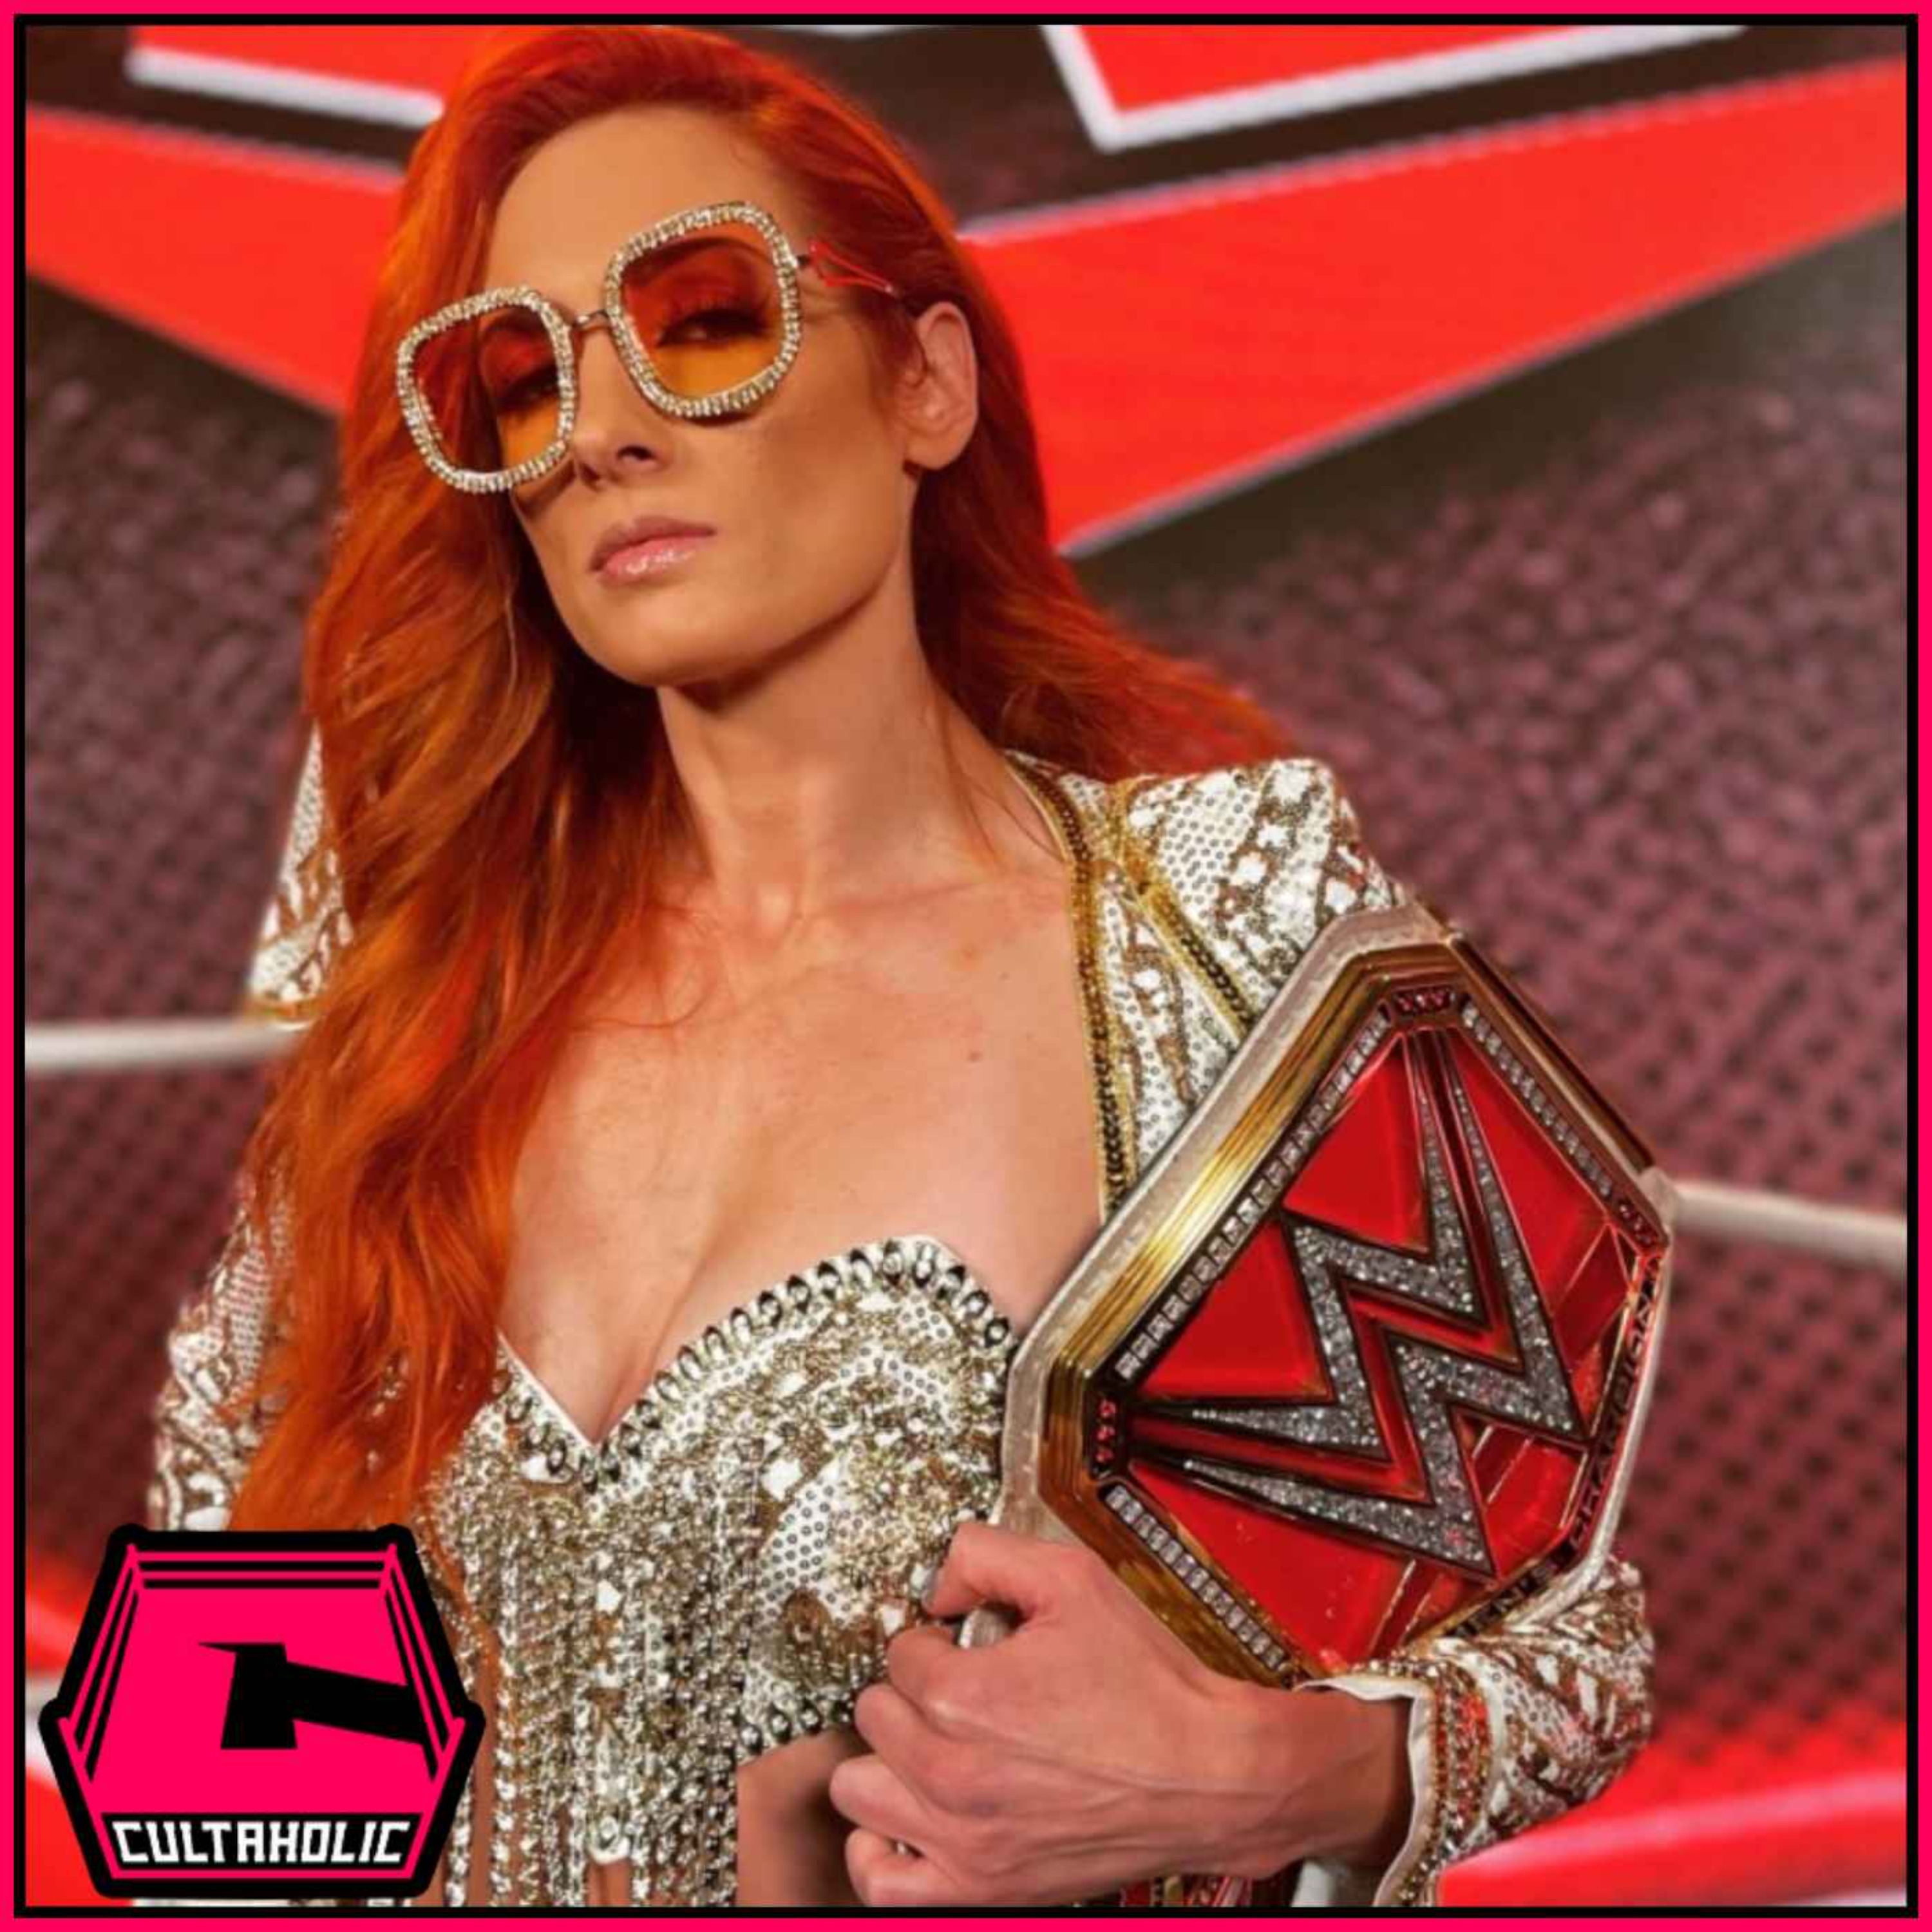 NEWS: Becky Lynch WWE Contract Expiring | Top NJPW Star Faces Early Retirement | WWE Backlash 2023 Matches Announced | CULTAHOLIC WRESTLING NEWS